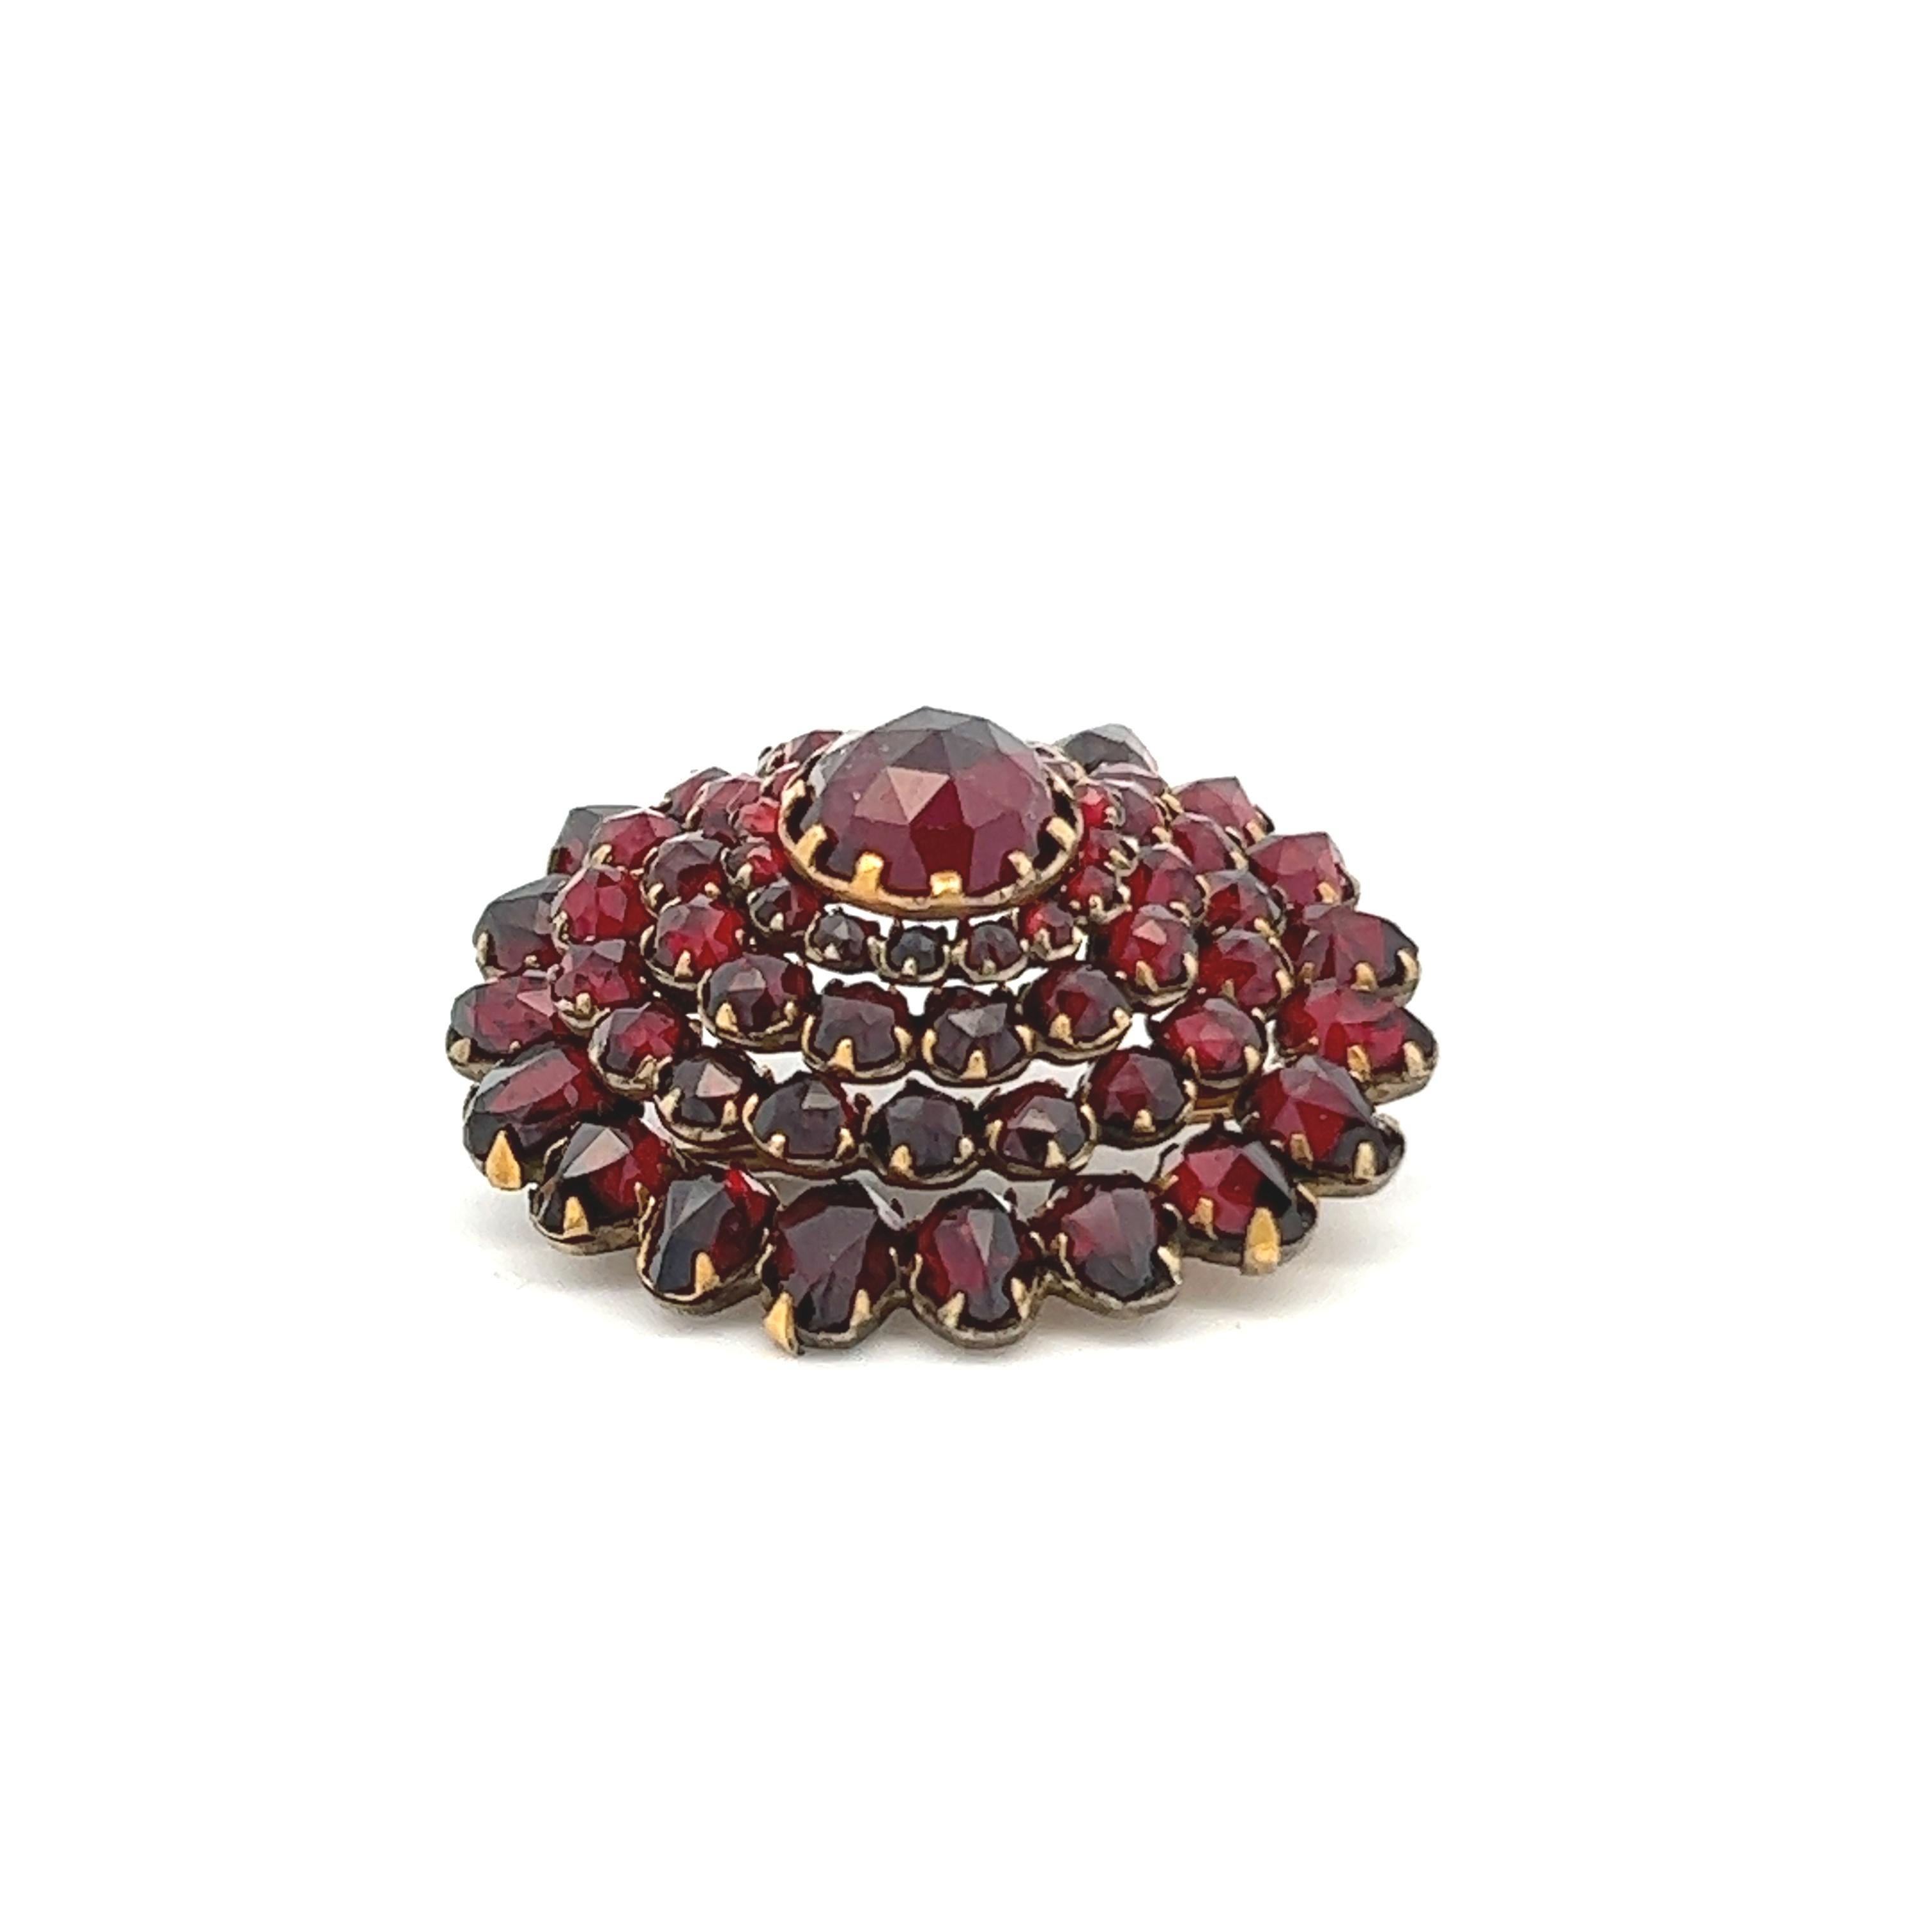 1890 Victorian Gold Gilt Over Silver Garnet Tiered Circle Pin  In Excellent Condition For Sale In Lexington, KY